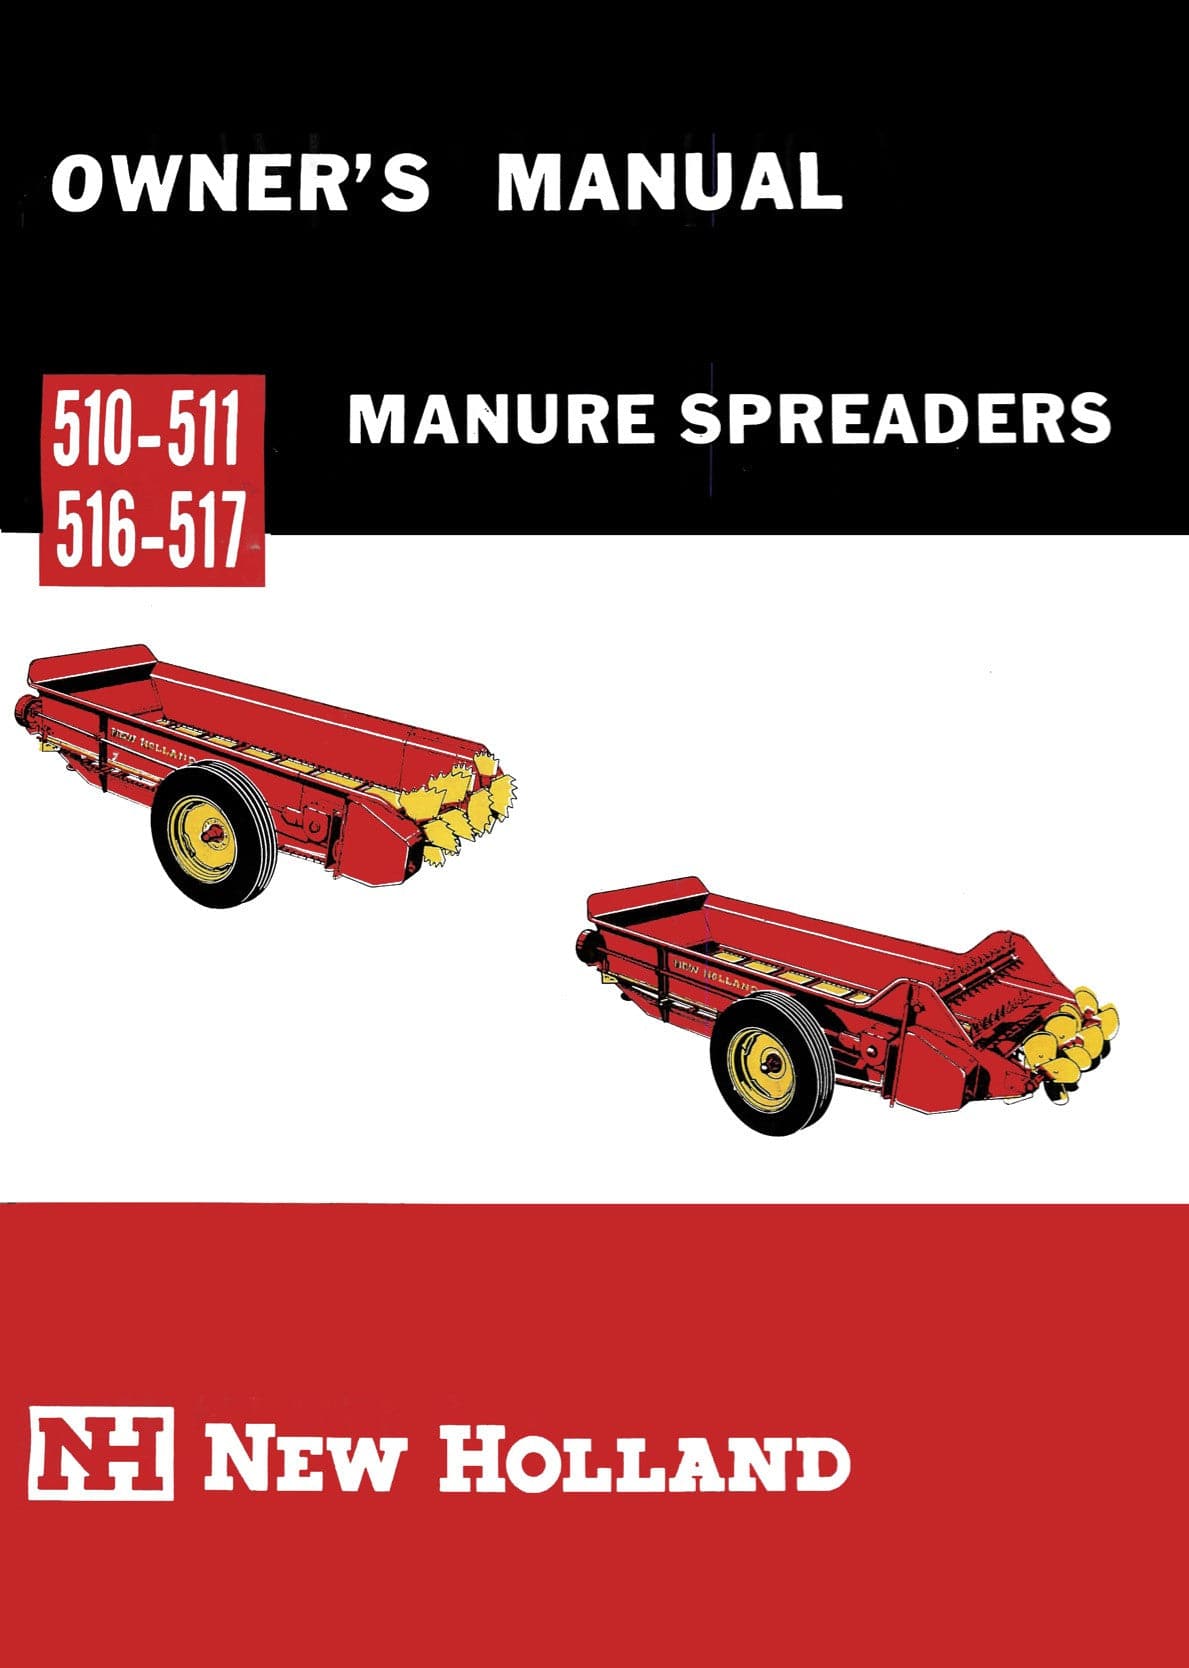 New Holland 510-511, 516-517 Manure Spreaders - Owner's Manual - Ag Manuals - A Provider of Digital Farm Manuals - 1